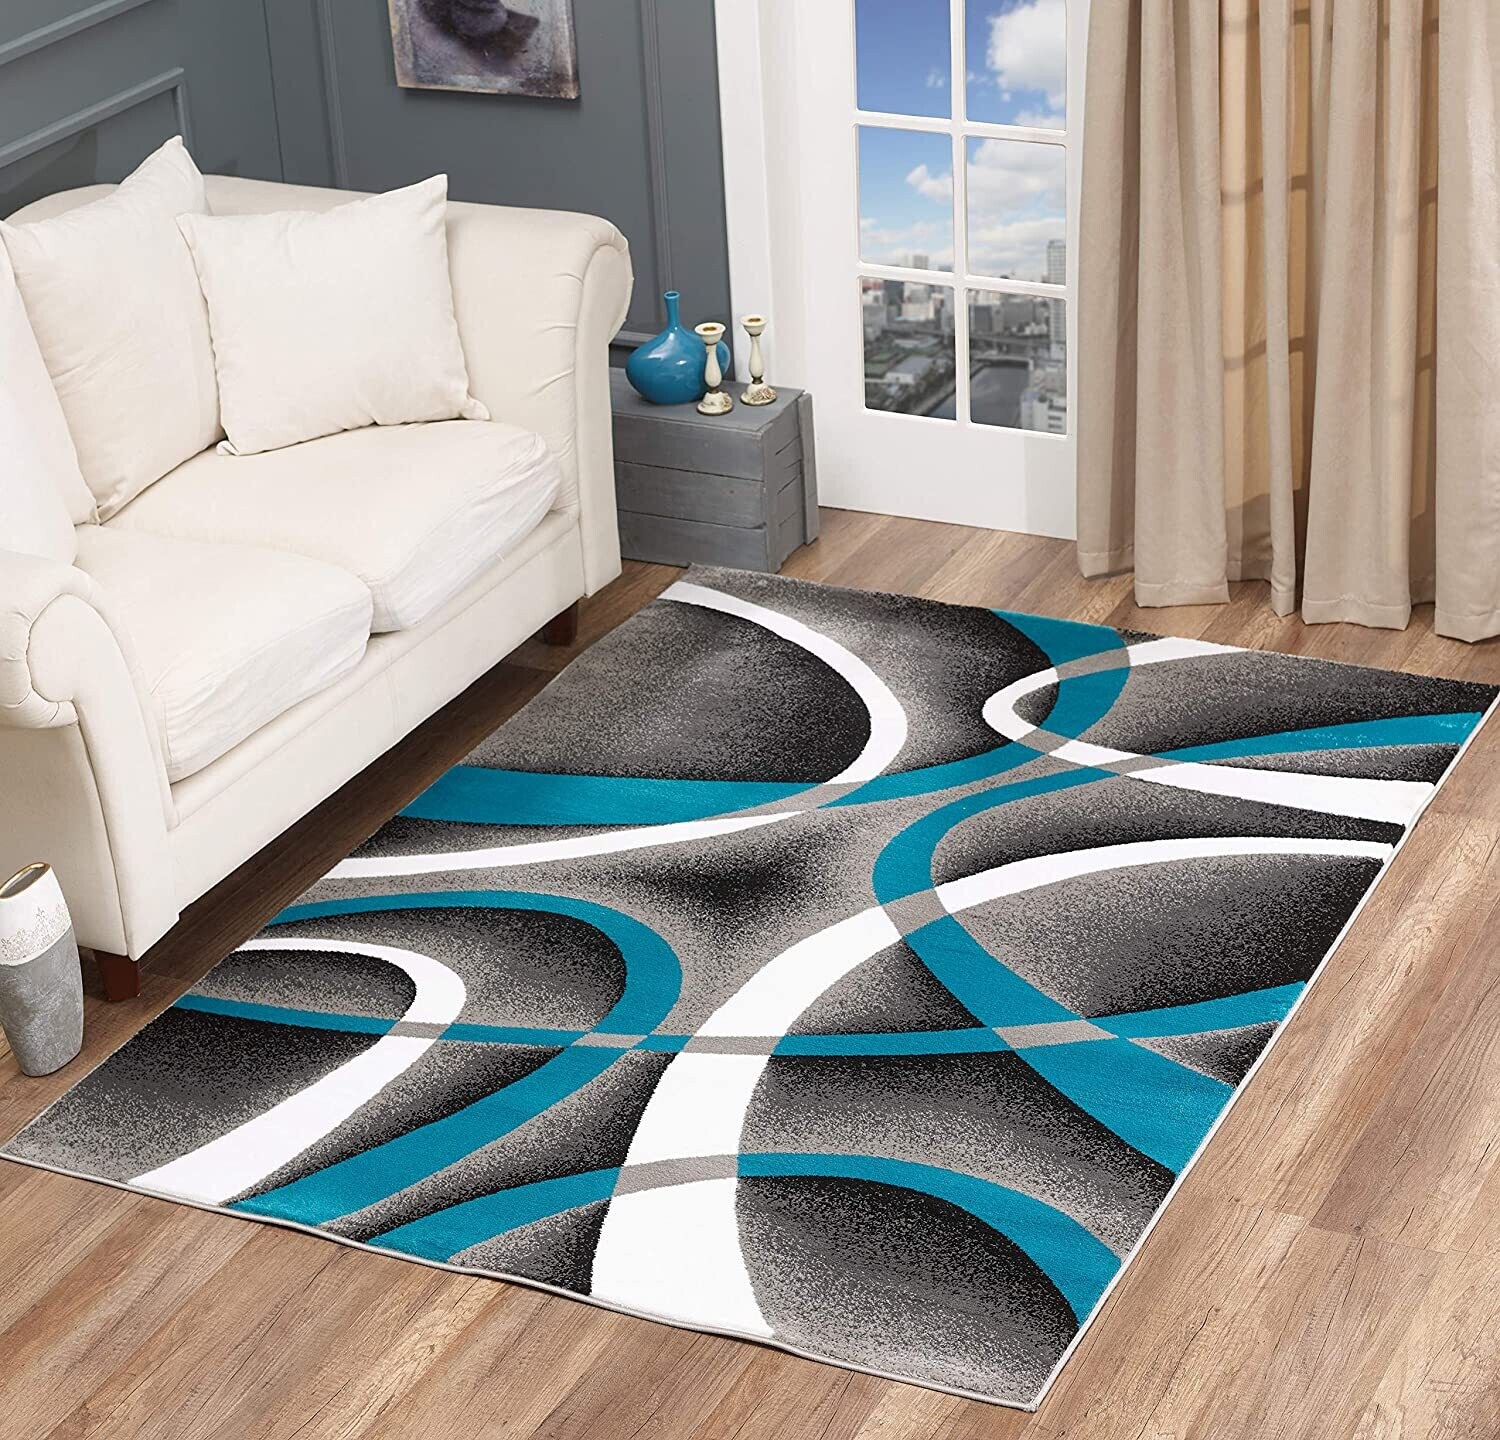 Sevilla Collection Swirls Turquoise Light Grey Rug Carpet Bedroom Living Room Accent (4816)